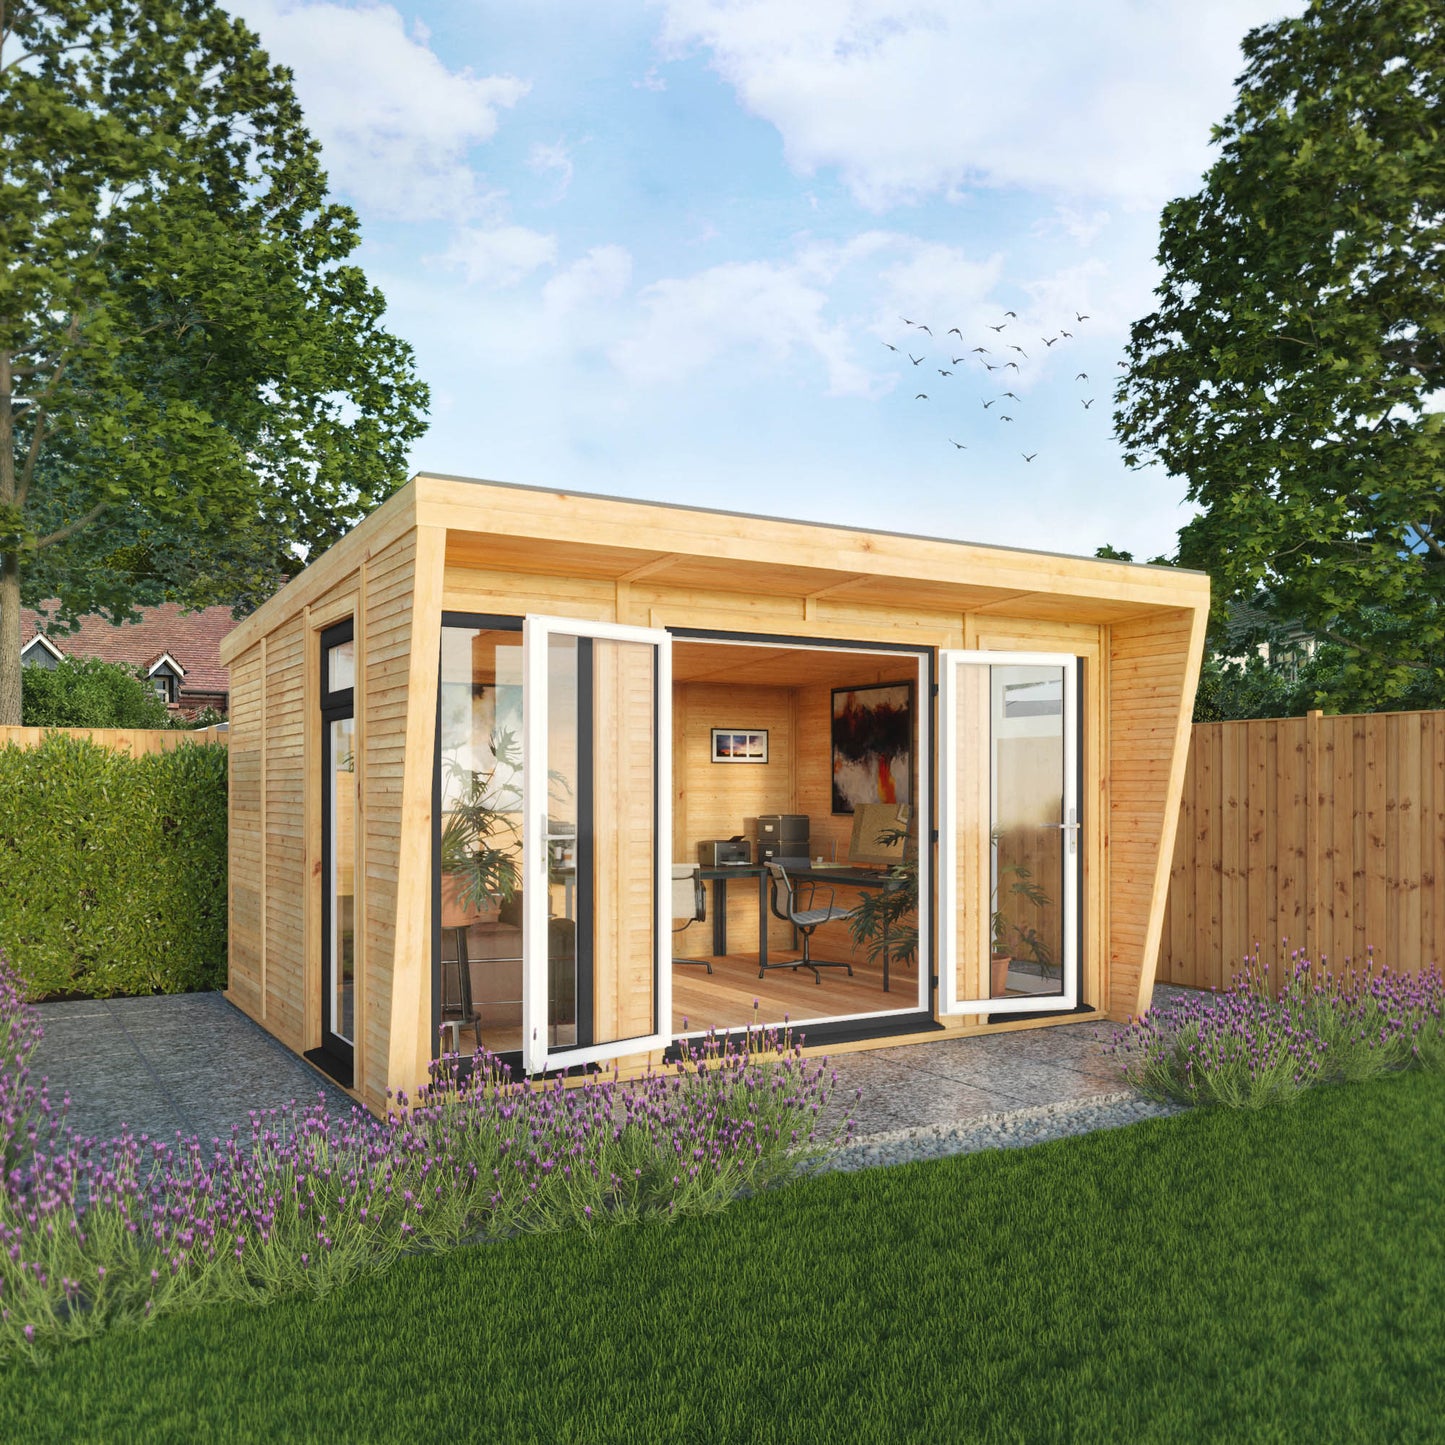 The Harlow 4m x 3m Premium Insulated Garden Room with Anthracite UPVC